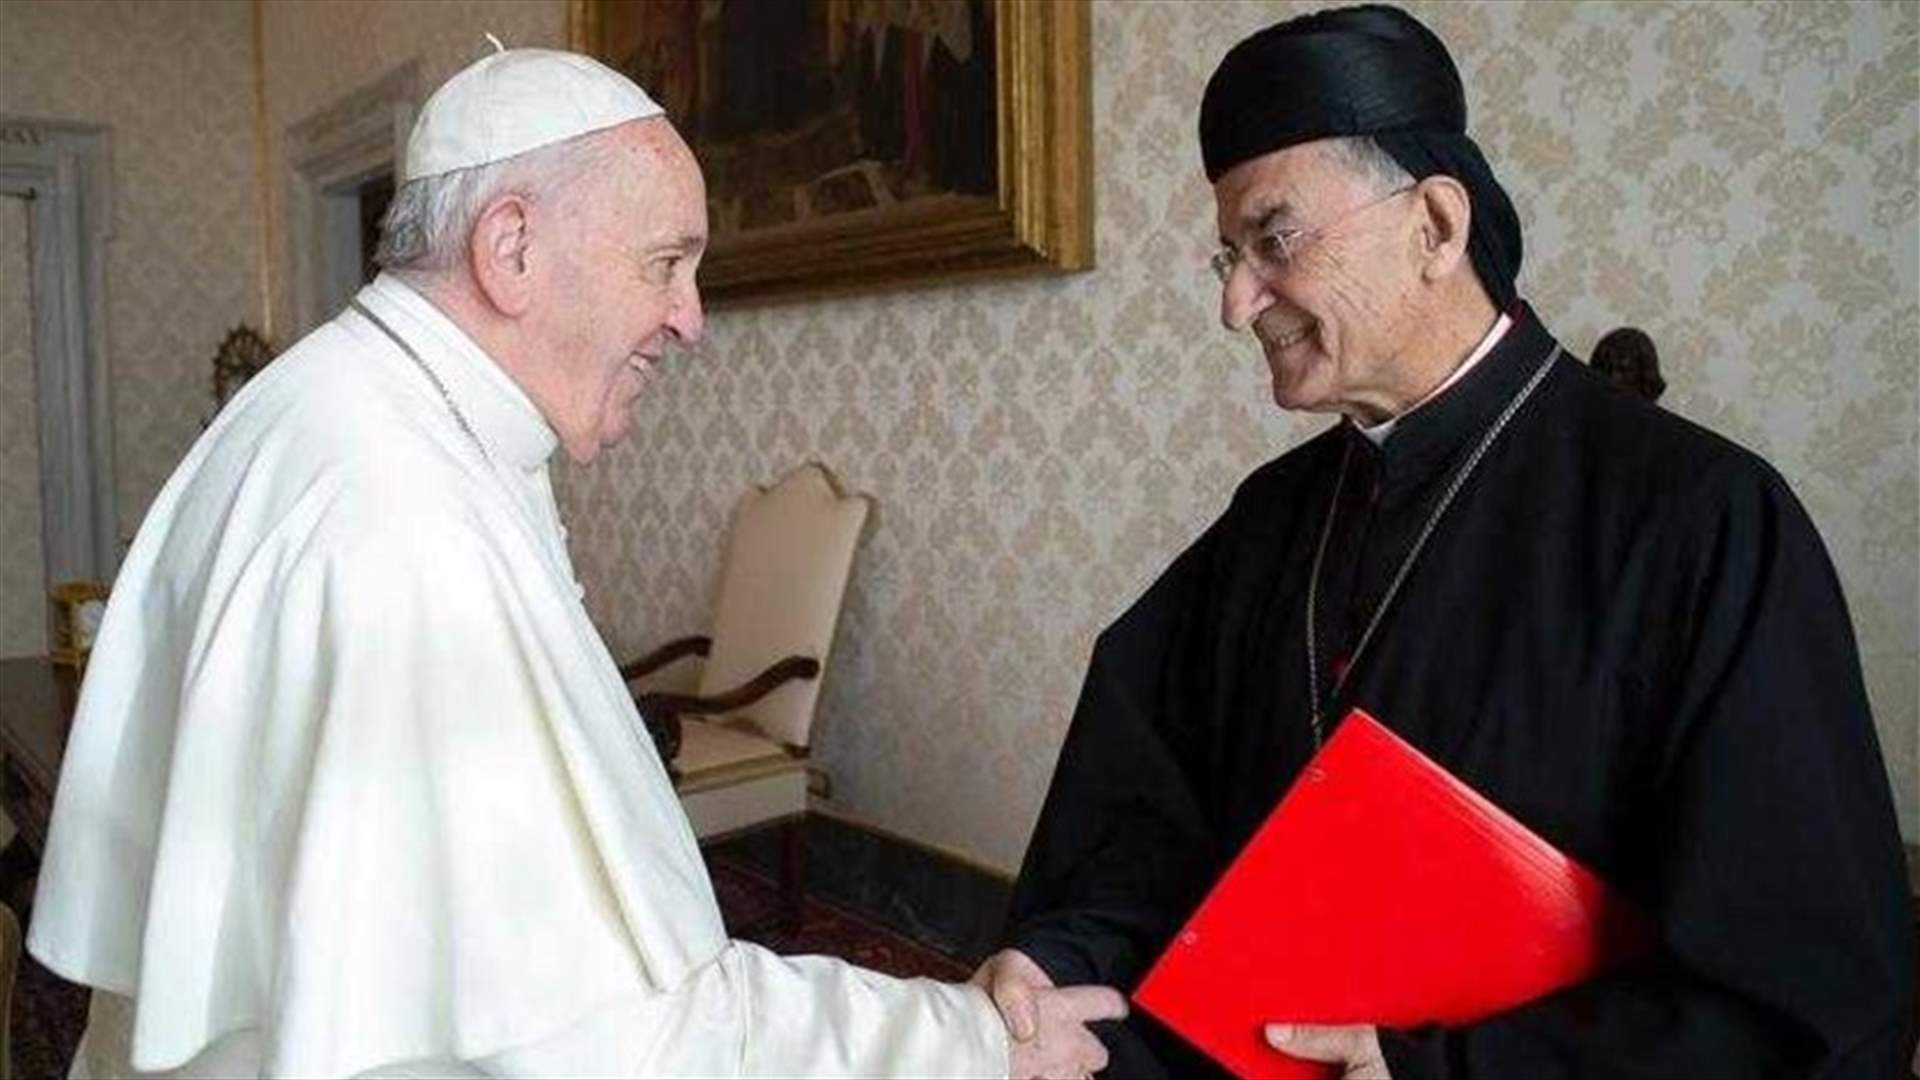 Rahi presents Pope Francis with a report on the prevailing situation in Lebanon and the region